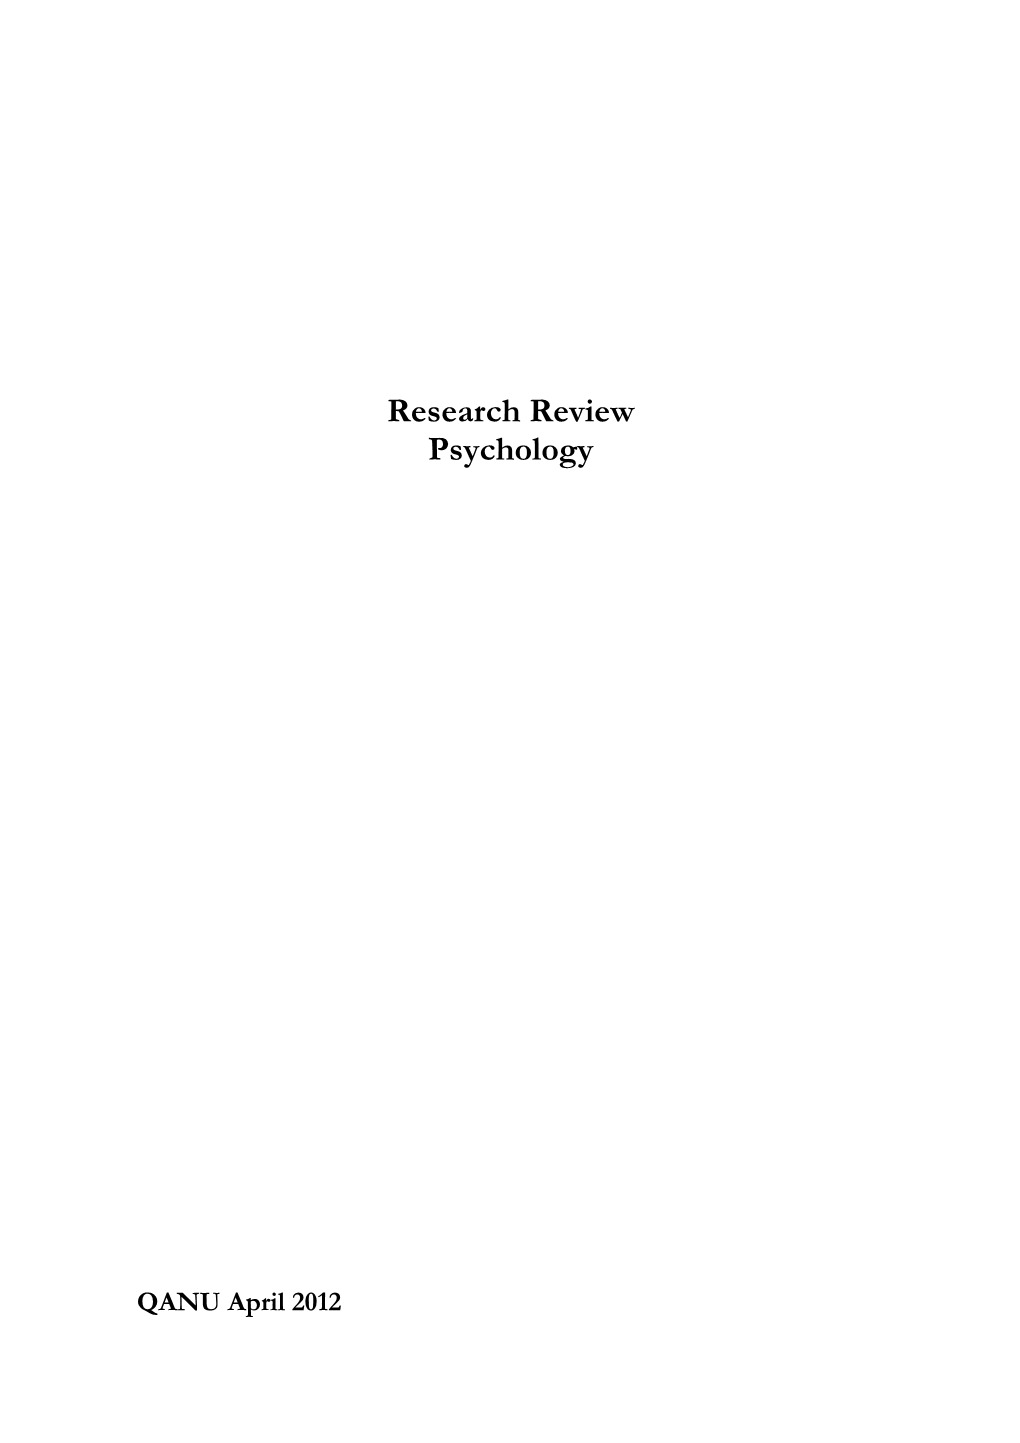 Research Review Psychology